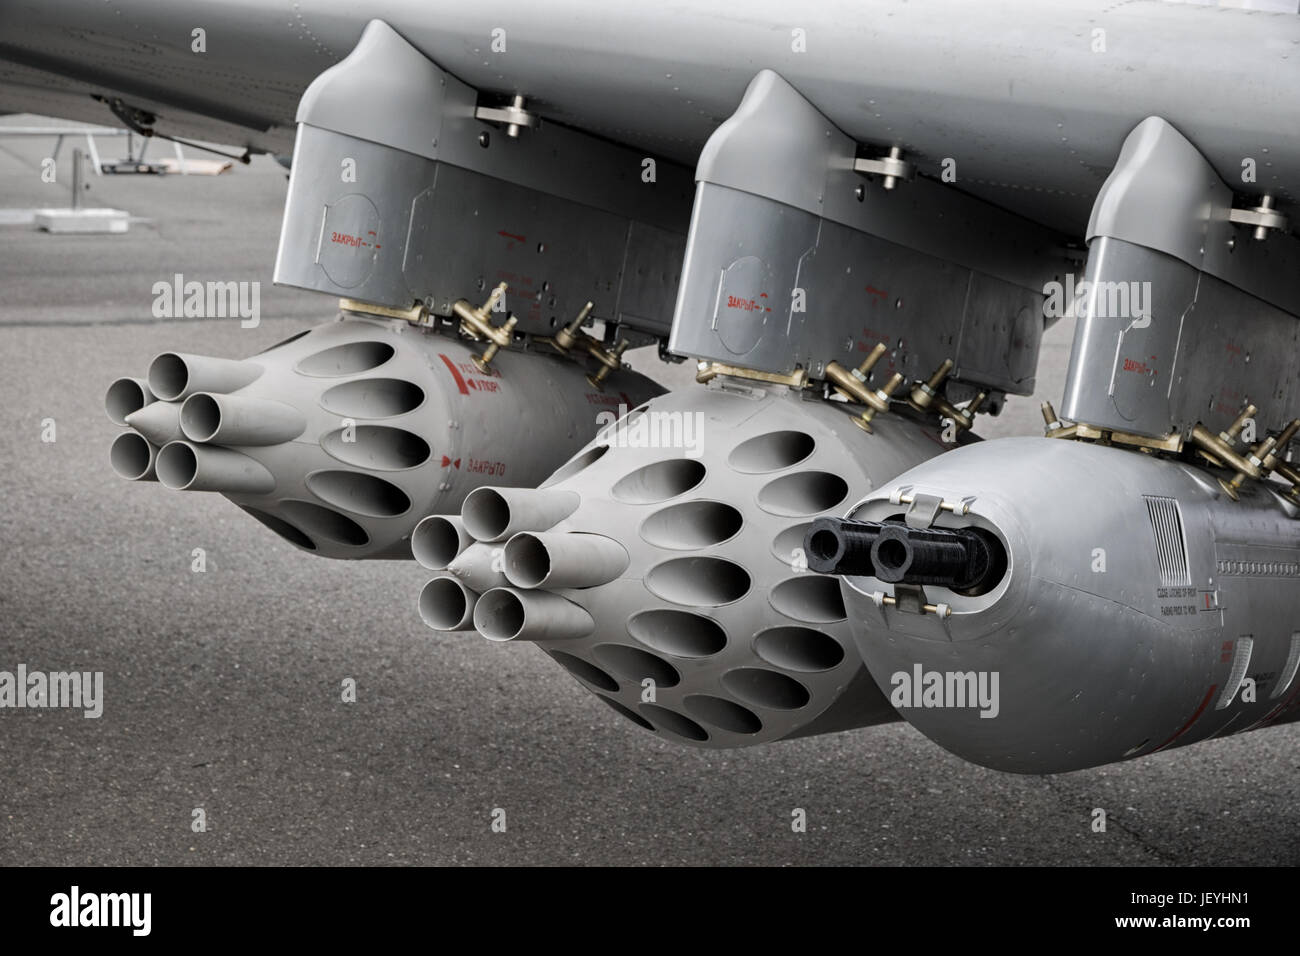 Weapon pods under the wing of a military plane Stock Photo